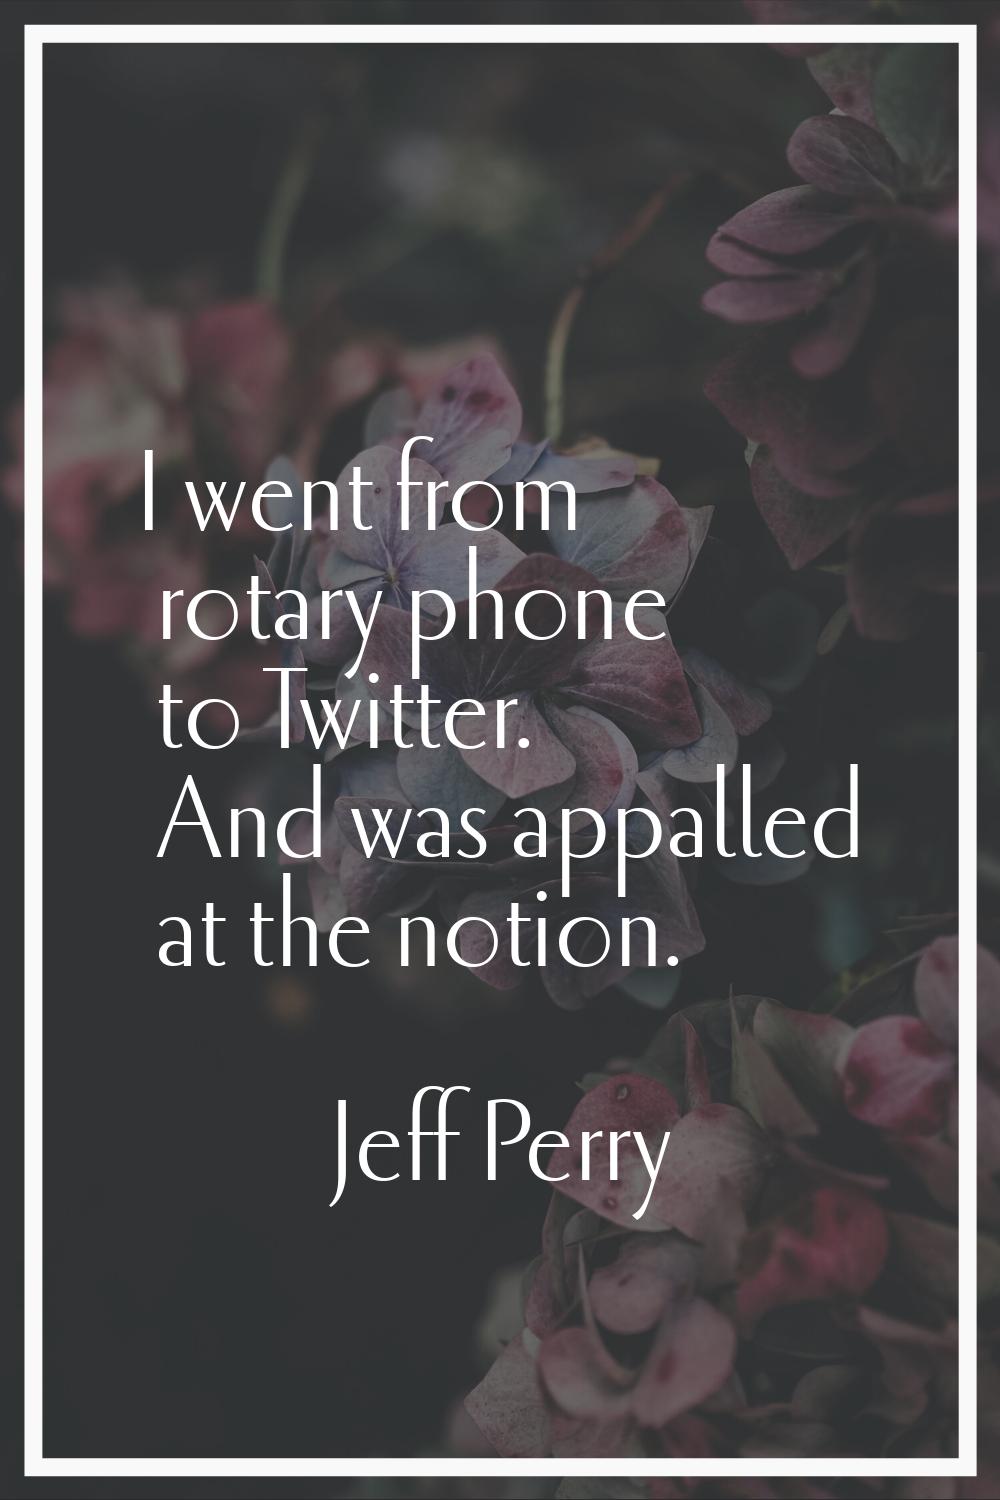 I went from rotary phone to Twitter. And was appalled at the notion.